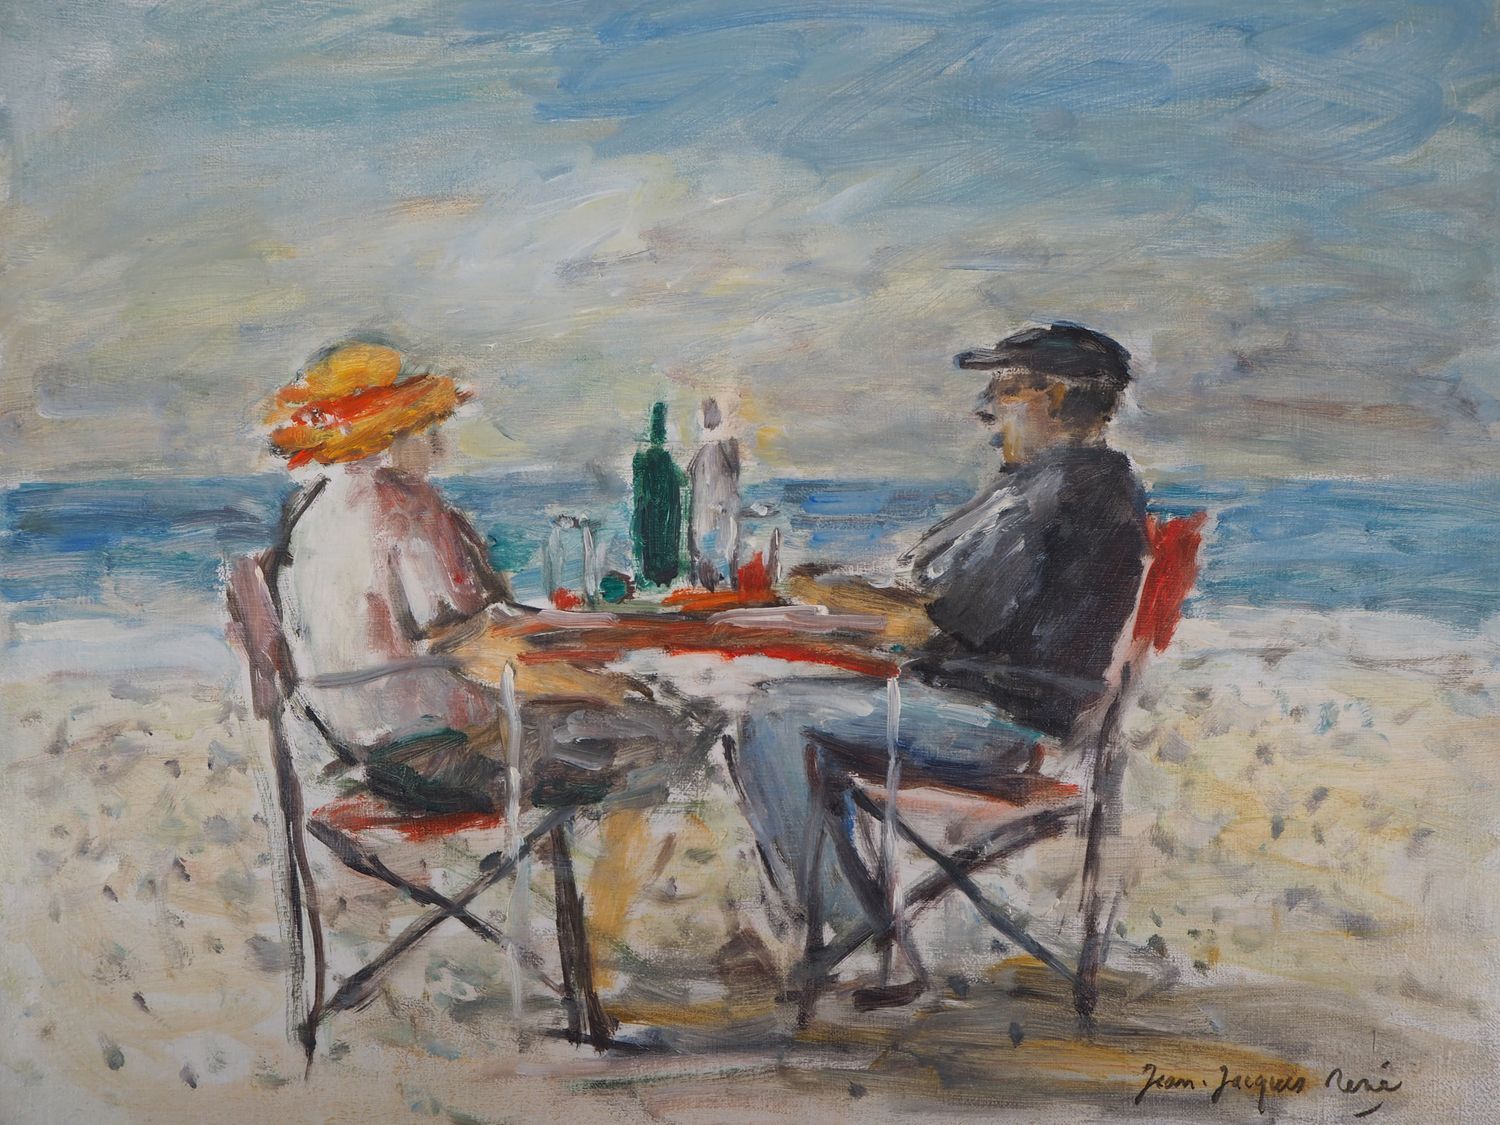 Null Jean-Jacques RENÉ

Lunch on the beach

Oil on canvas

Signed lower right

O&hellip;